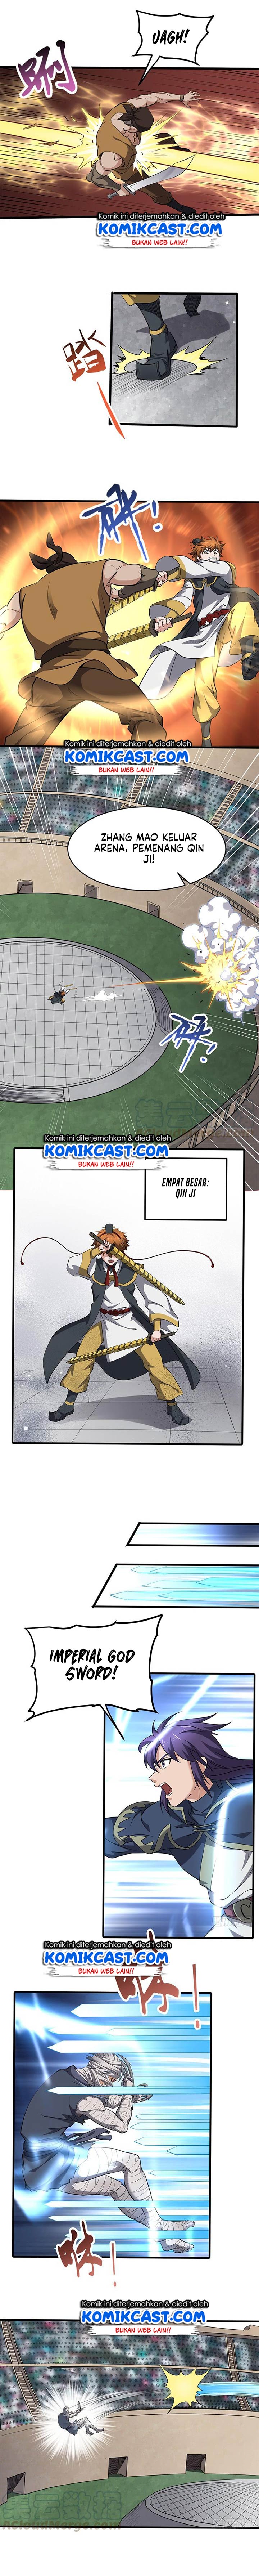 Chaotic Sword God Chapter 181